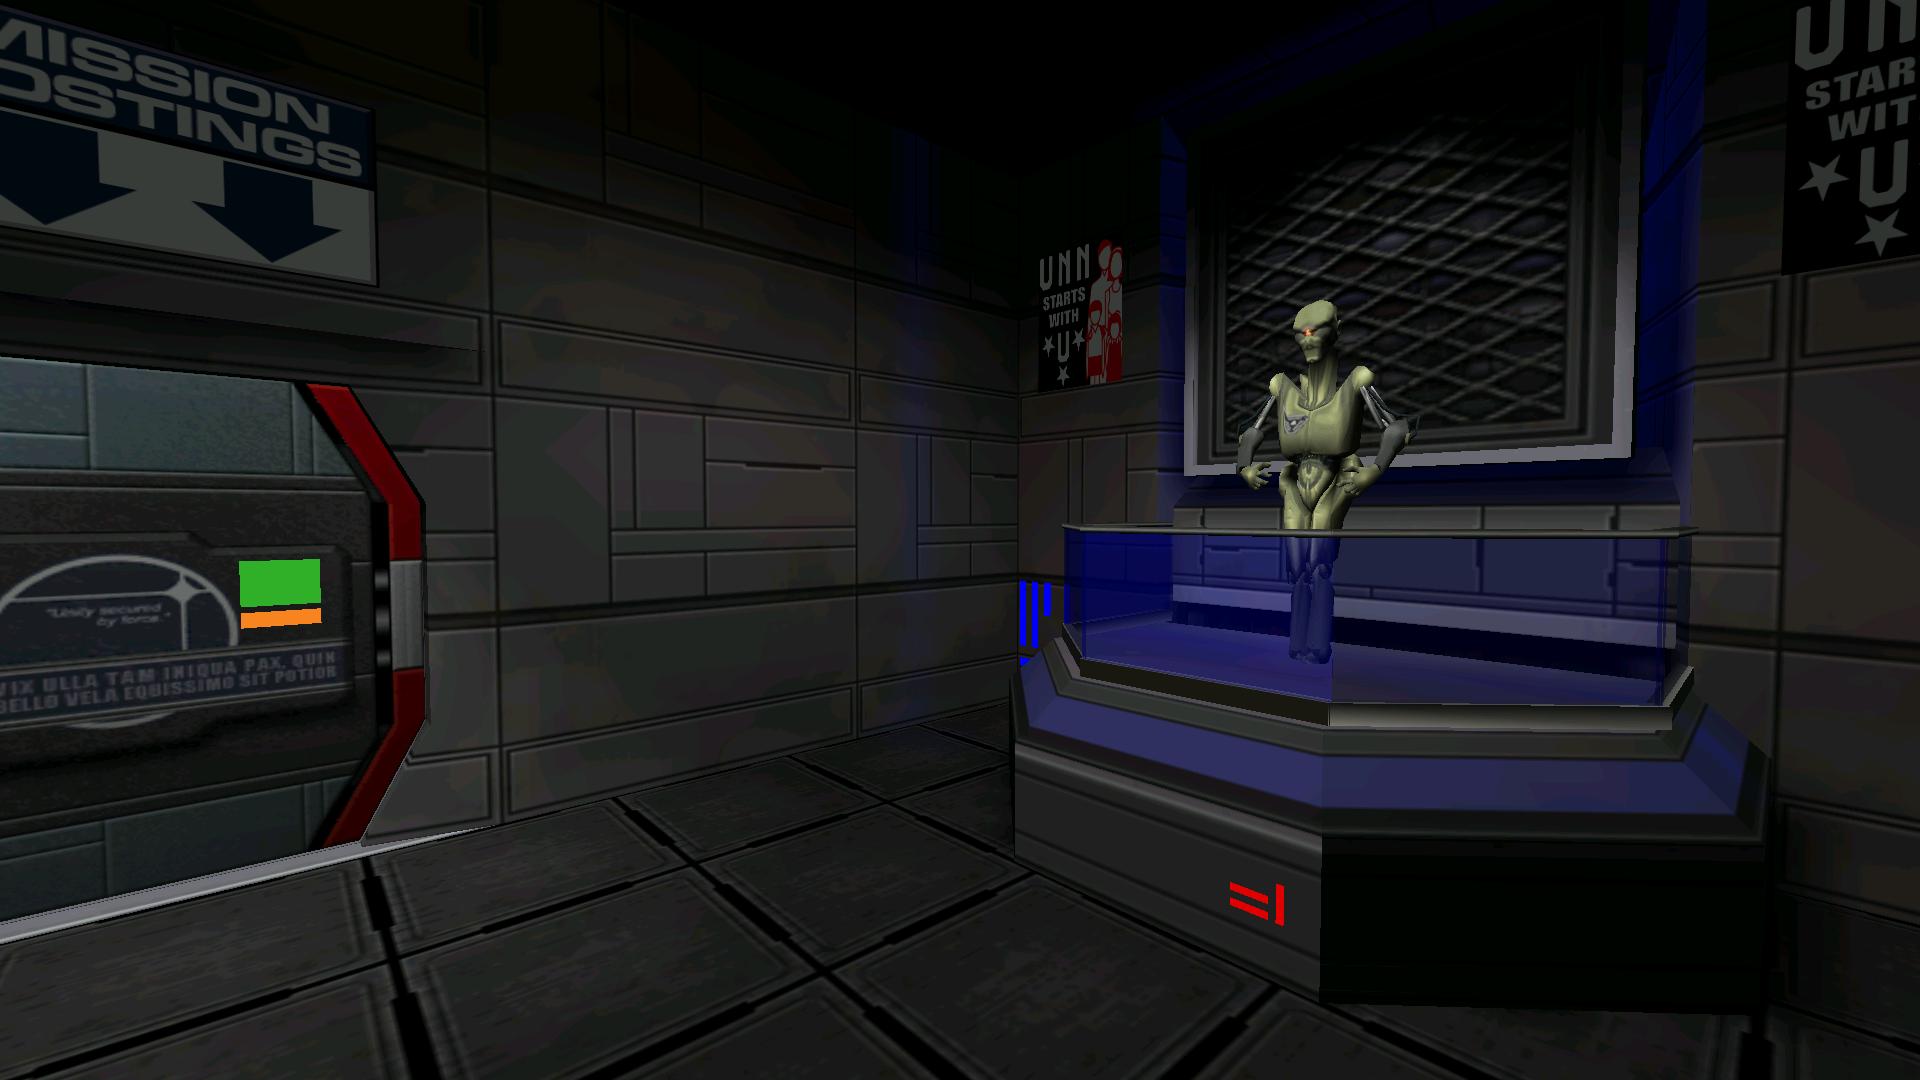 System Shock: Dilogy (1994-1999/PC/RePack от R.G. Catalyst)